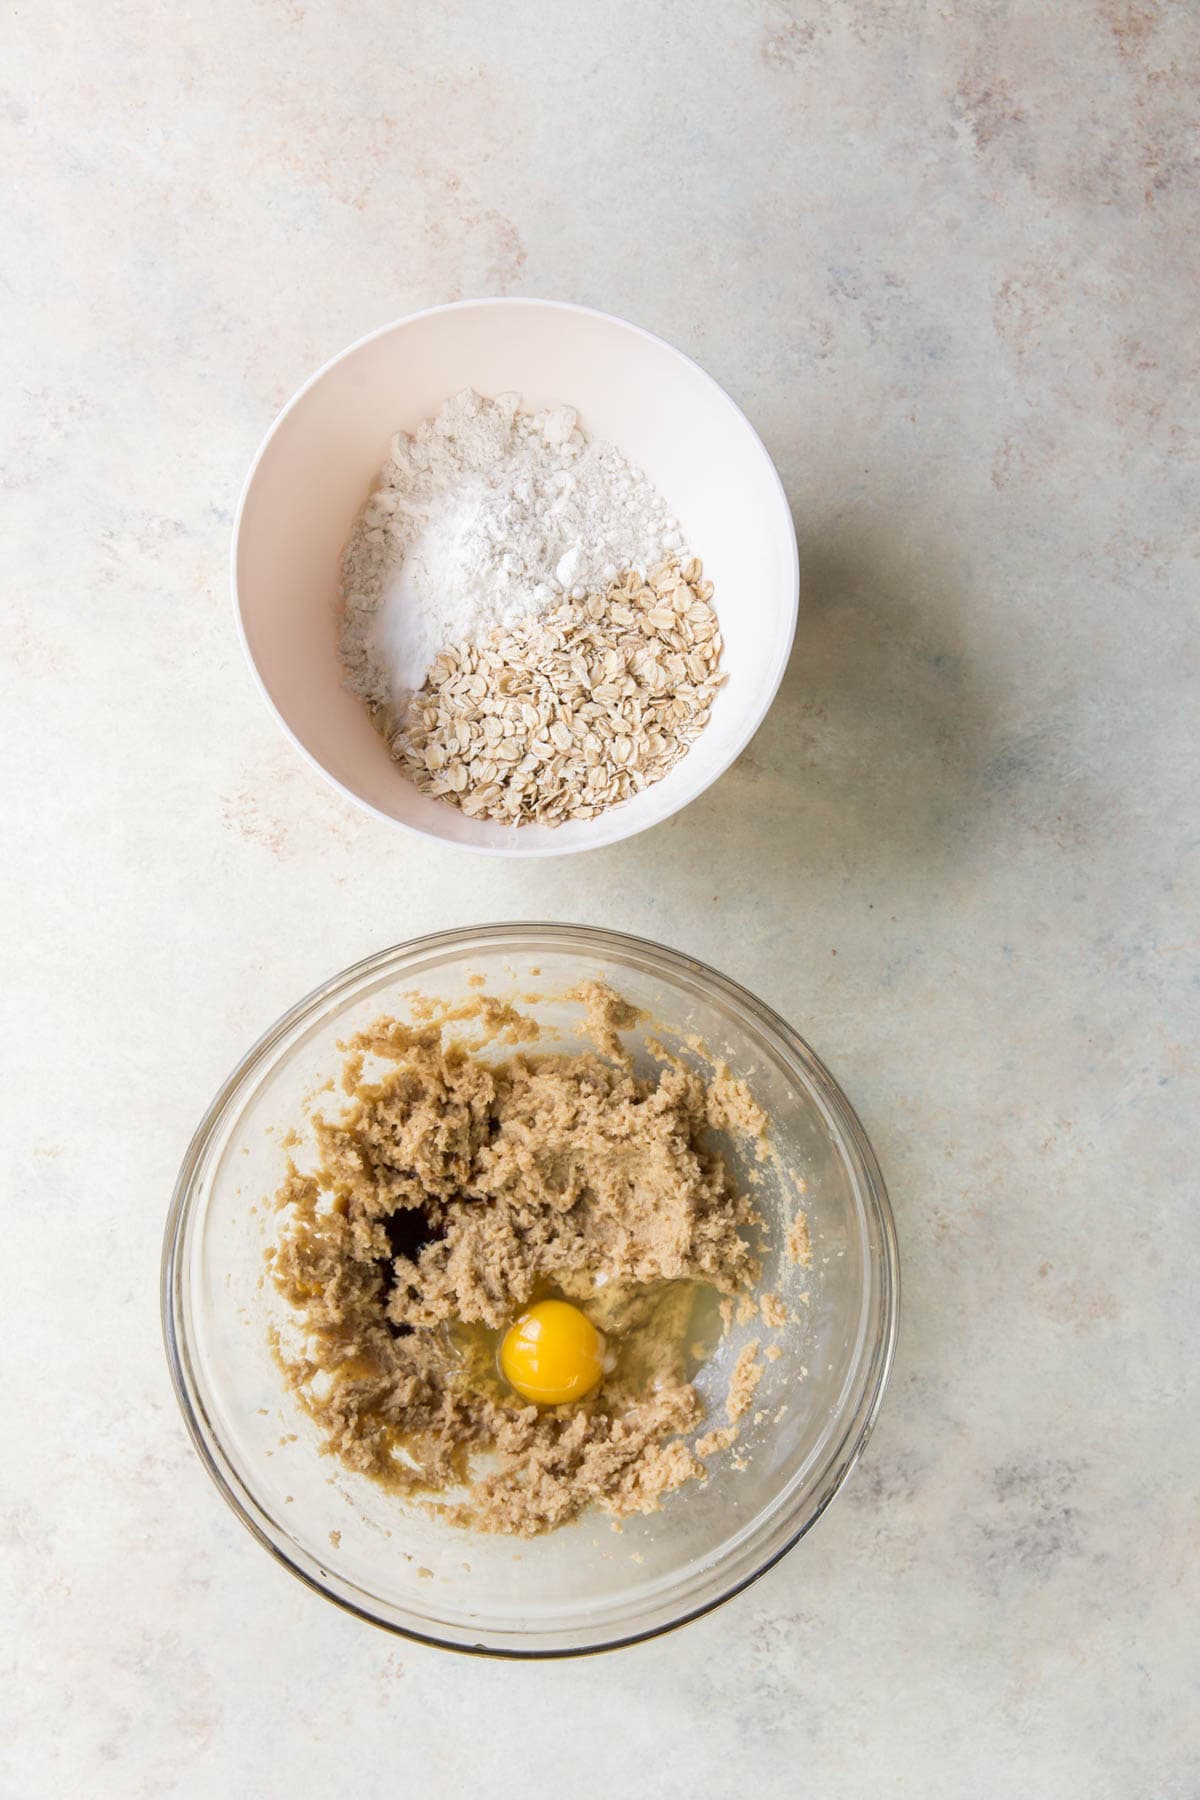 Two bowls, one with oats and flour, and the other with a light tan mixture and an egg.